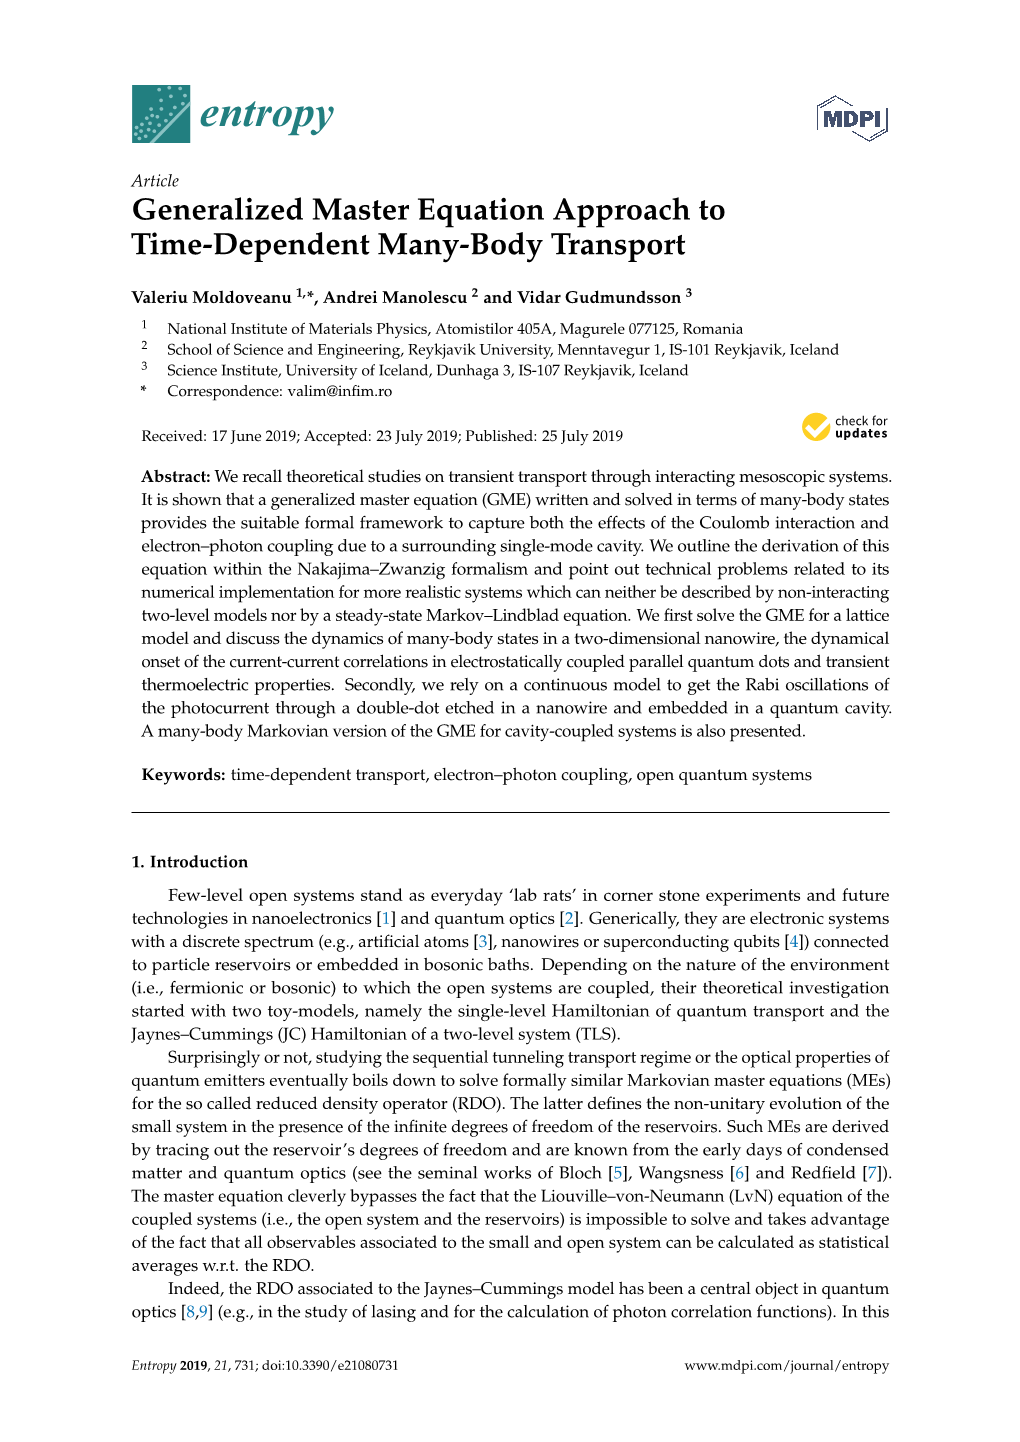 Generalized Master Equation Approach to Time-Dependent Many-Body Transport